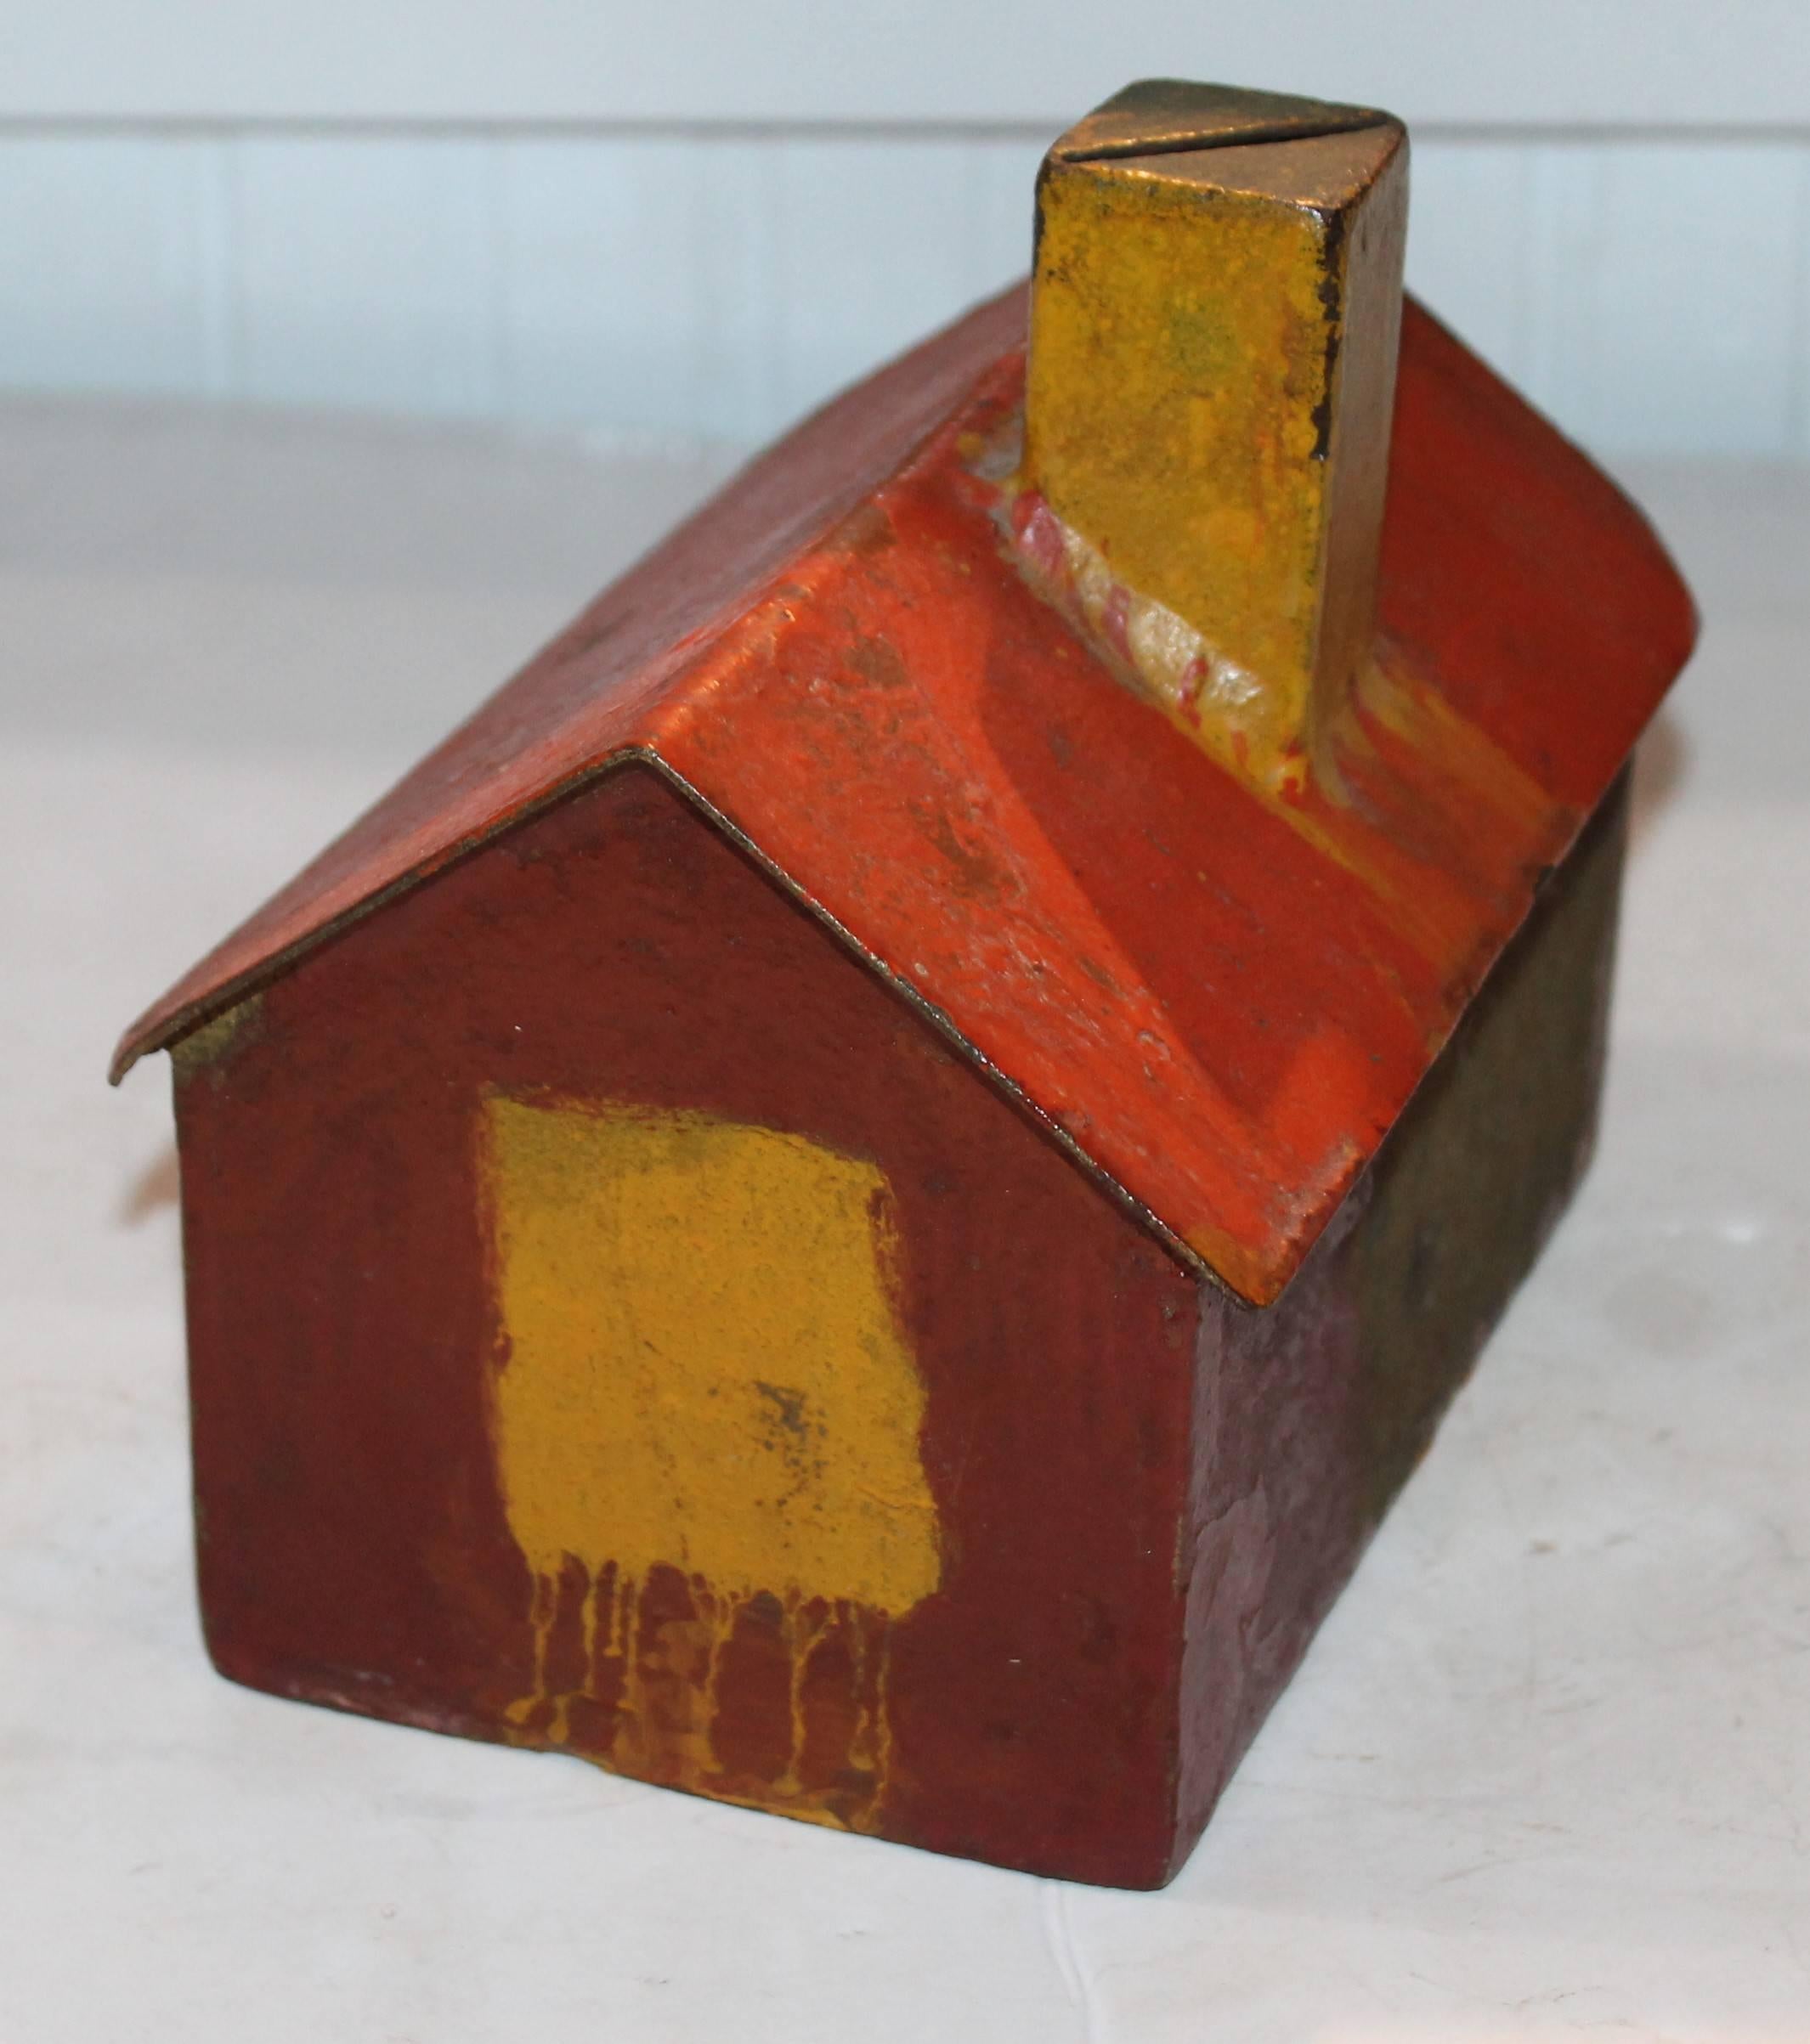 This fun 19th century Folk Art bank is made from sheet iron and all original salmon and mustard paint. It is funny there is no way to get the money out once it goes in. You would have to break the house open. Condition is good.